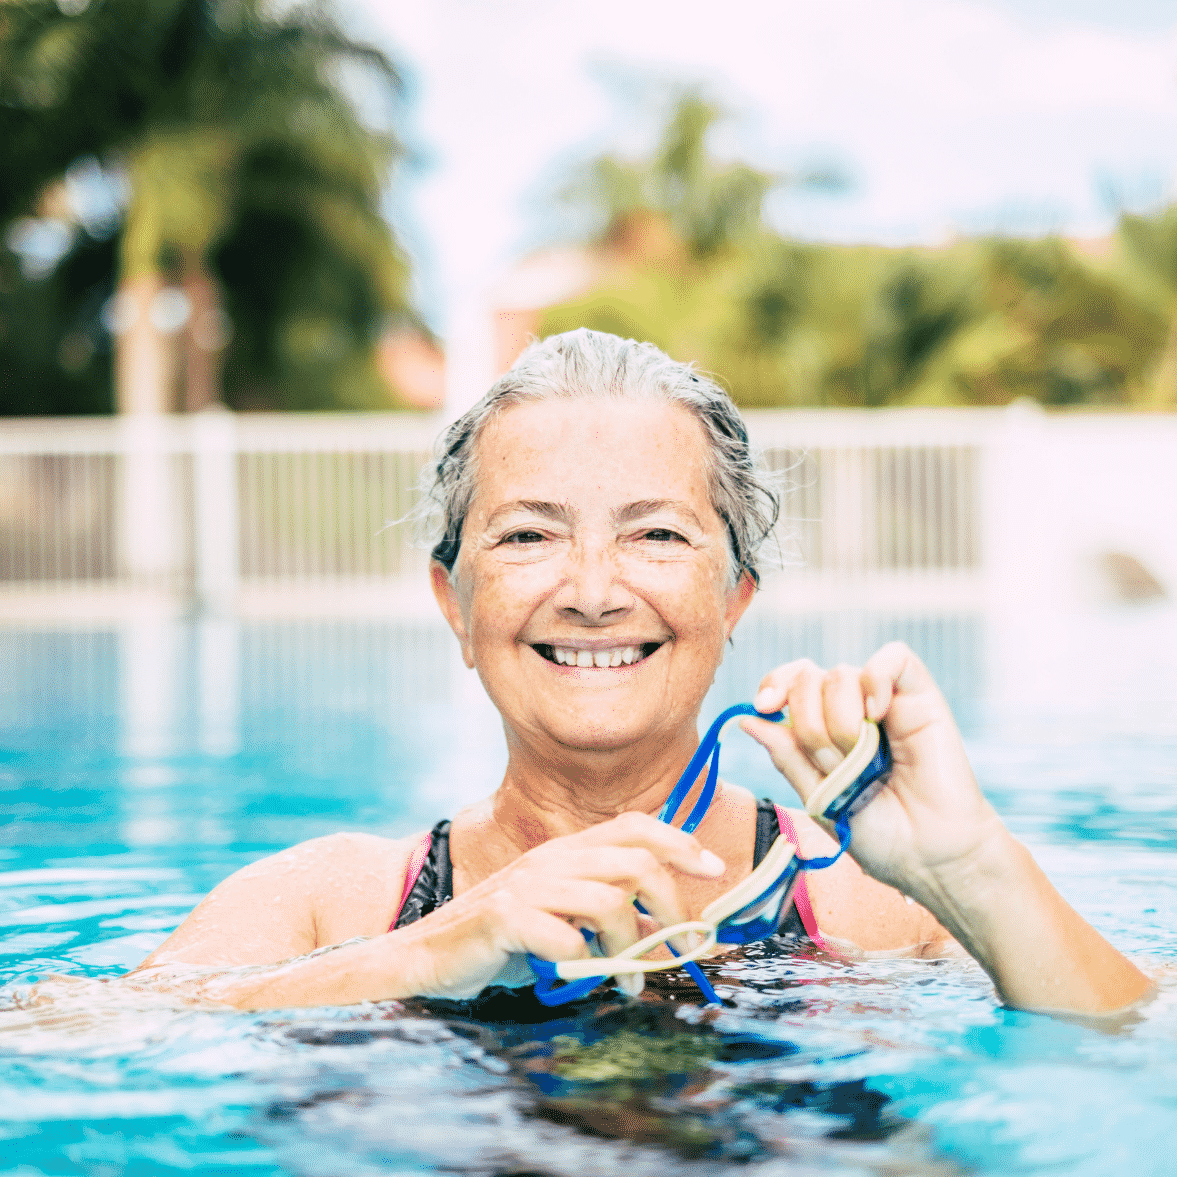 Pool Exercises For Seniors - 30 Minute Pool Workout - Get Healthy U